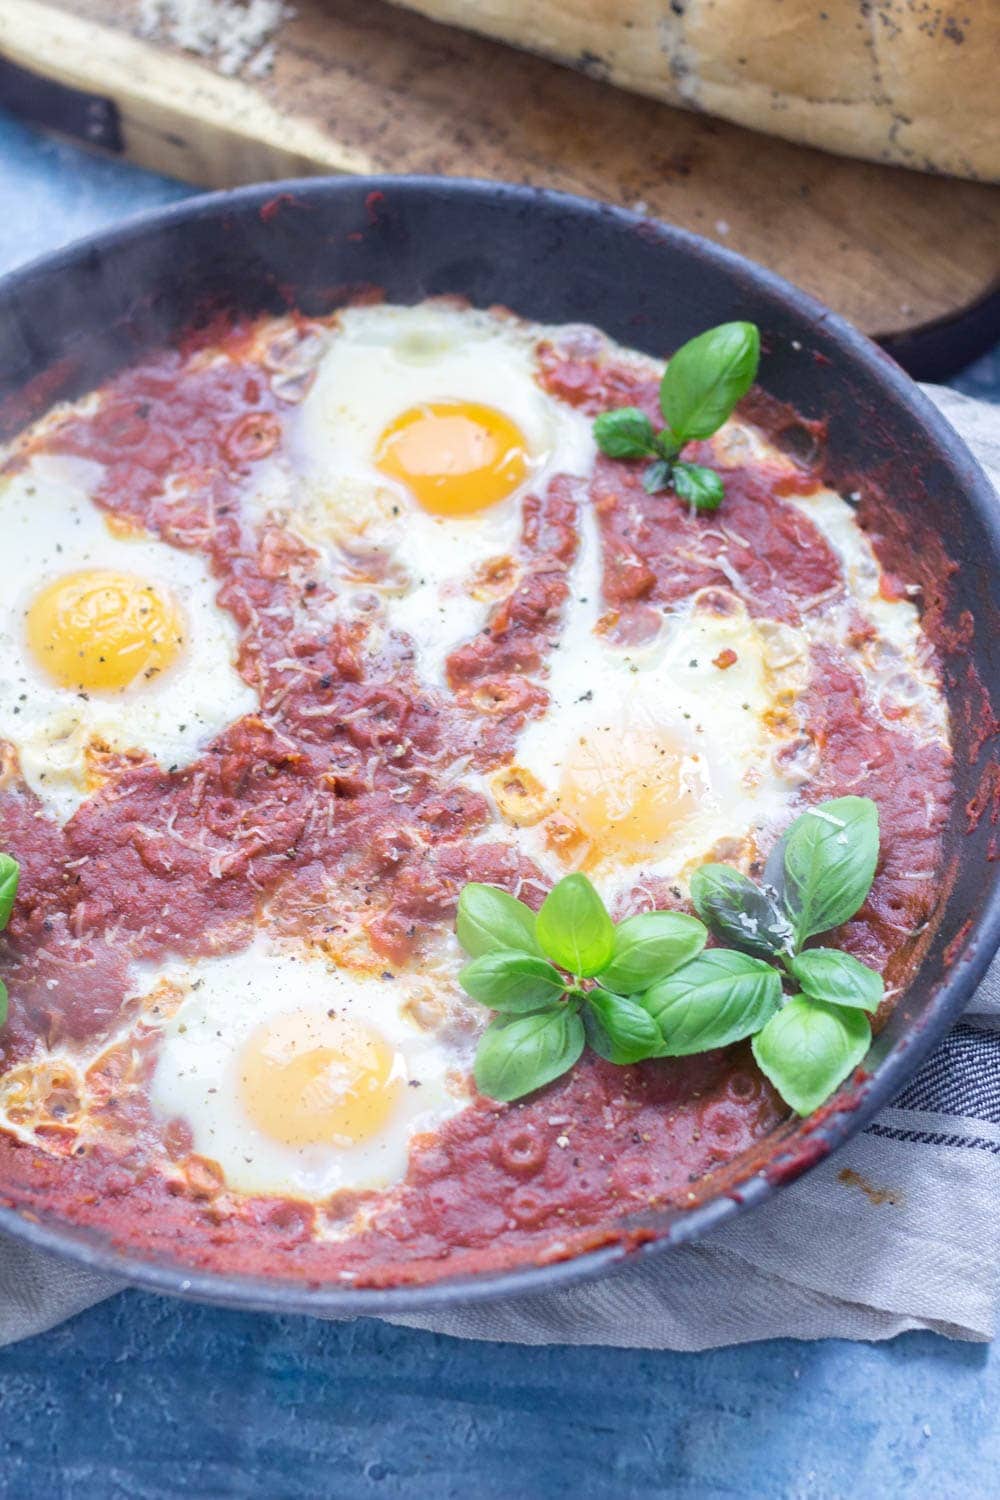 Serve up a hearty breakfast with this Italian shakshuka made with a delicious oregano tomato sauce and finished with a sprinkling of parmesan. #shakshuka #recipe #breakfast #brunch #italianfood